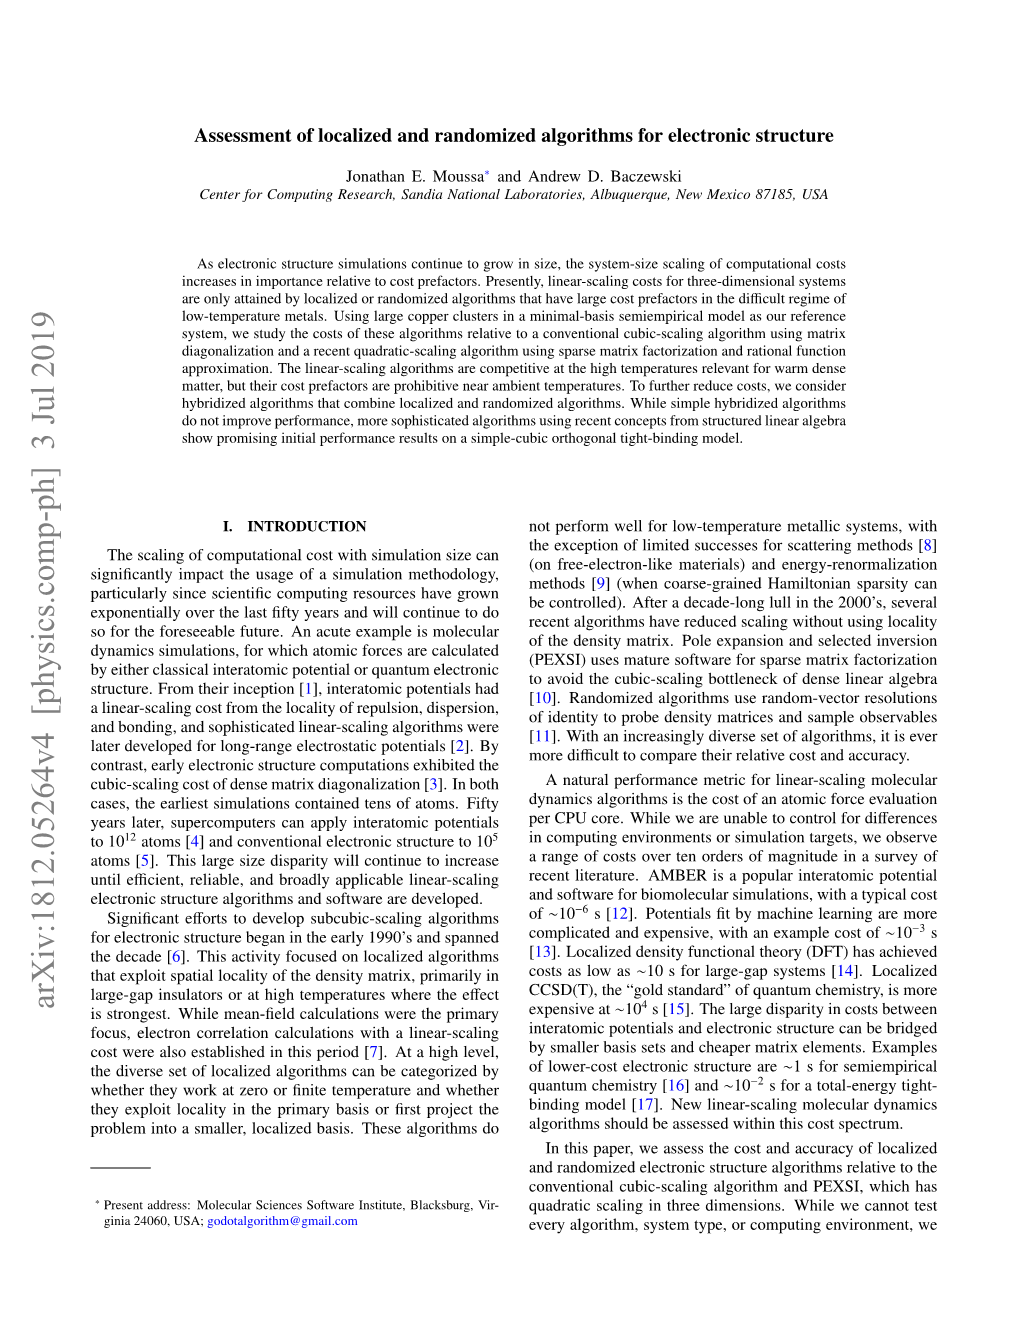 Assessment of Localized and Randomized Algorithms for Electronic Structure